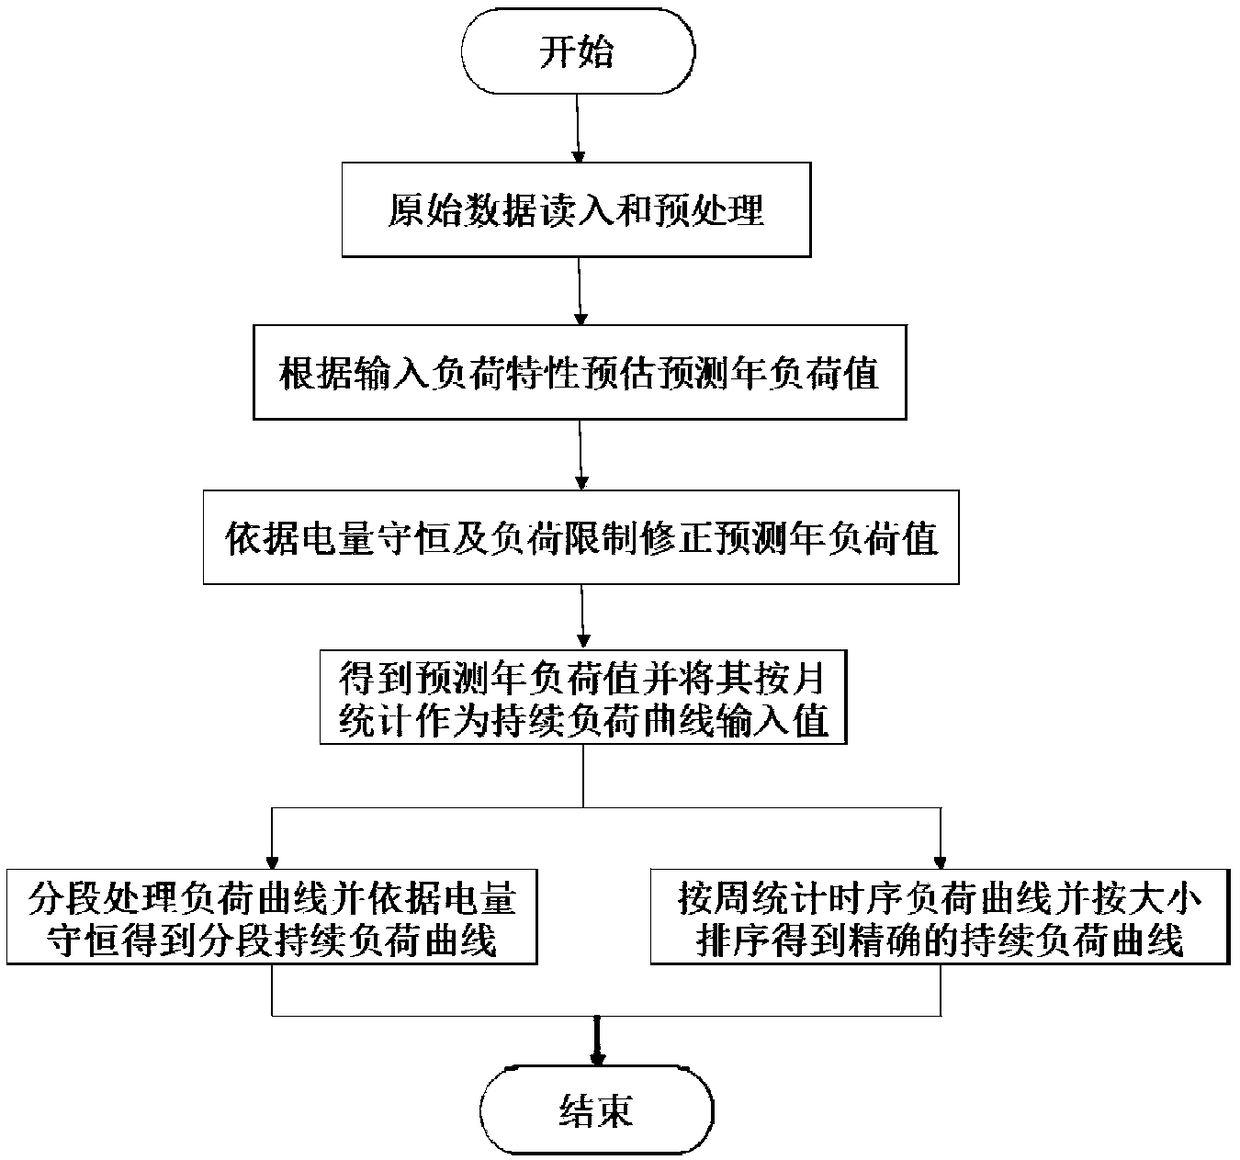 Medium and long-term load curve generation method for satisfying electricity quantity constraint